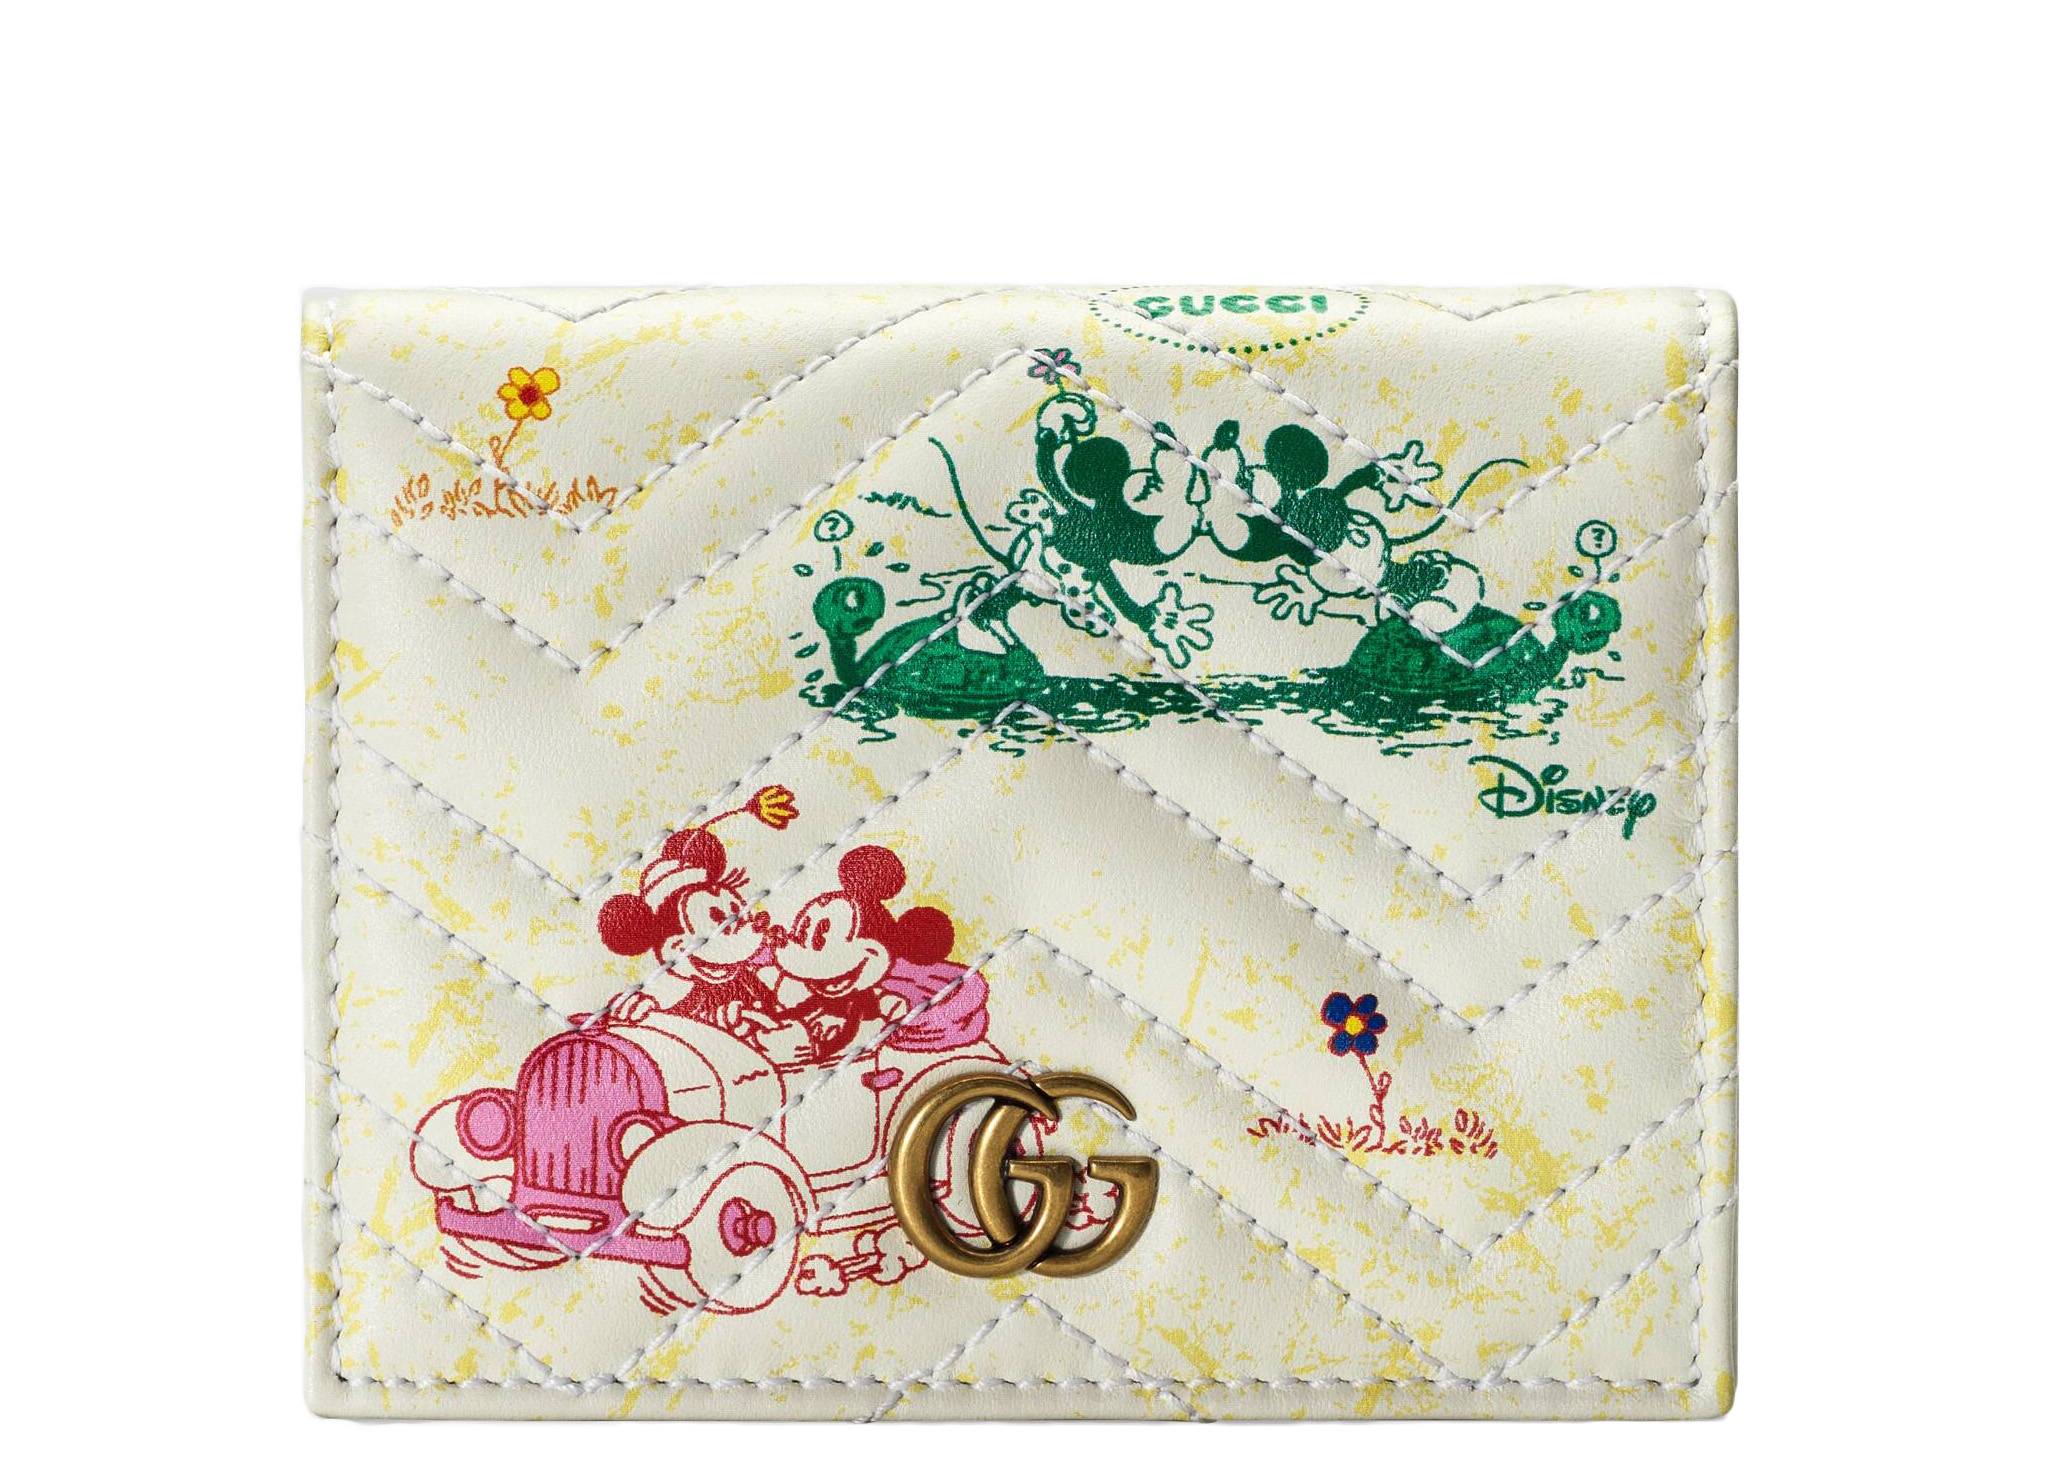 Gucci x Disney GG Marmont Card Case Wallet Matelasse Ivory in 